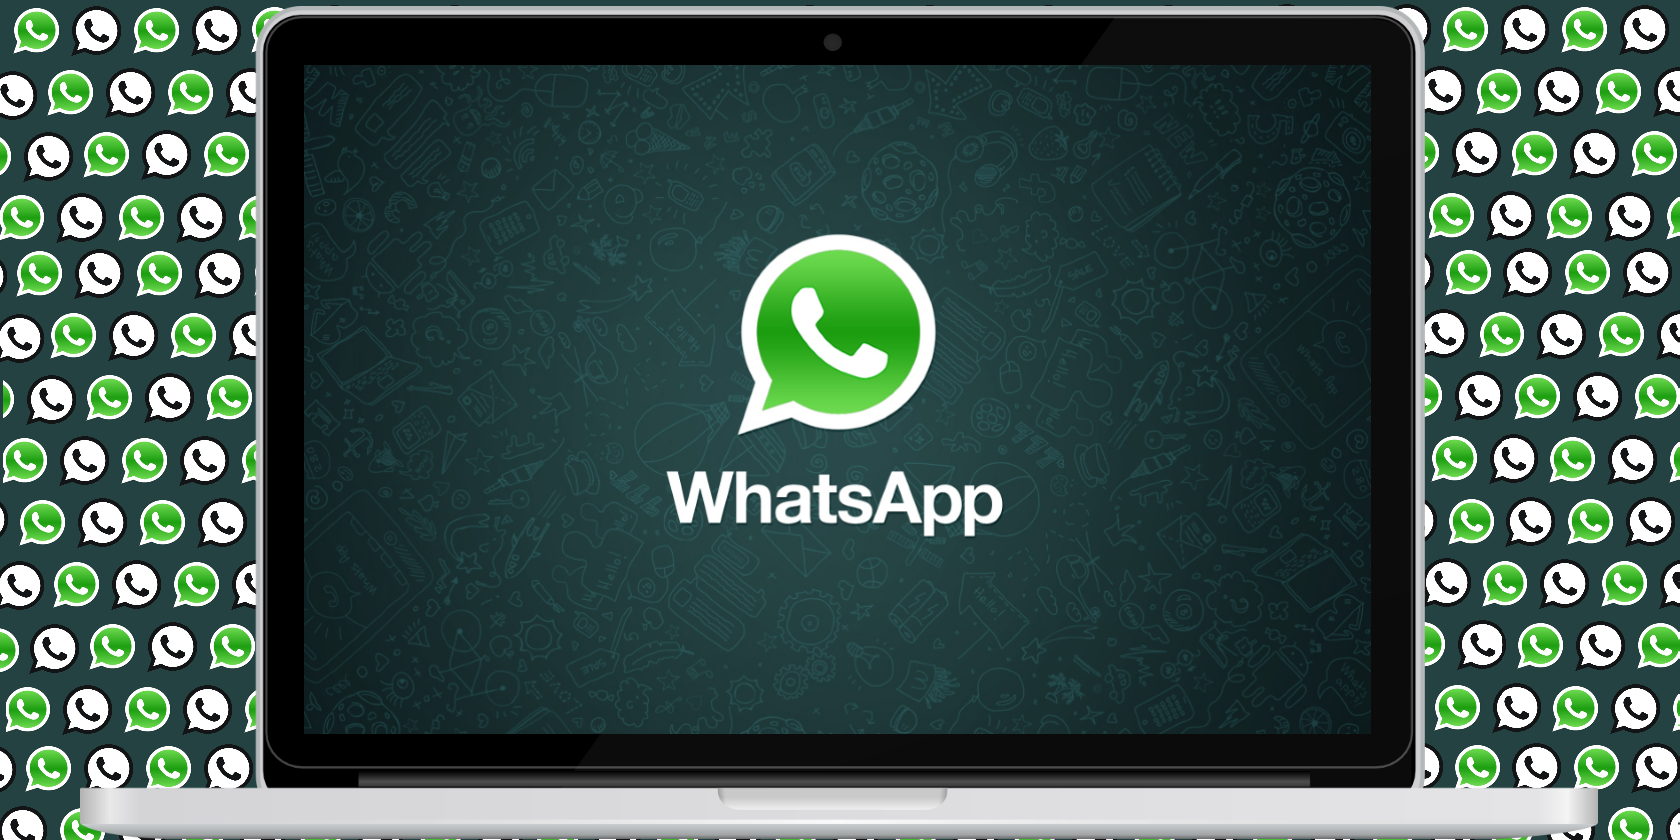 How To Use Whatsapp On Your Pc And Sync With Your Phone